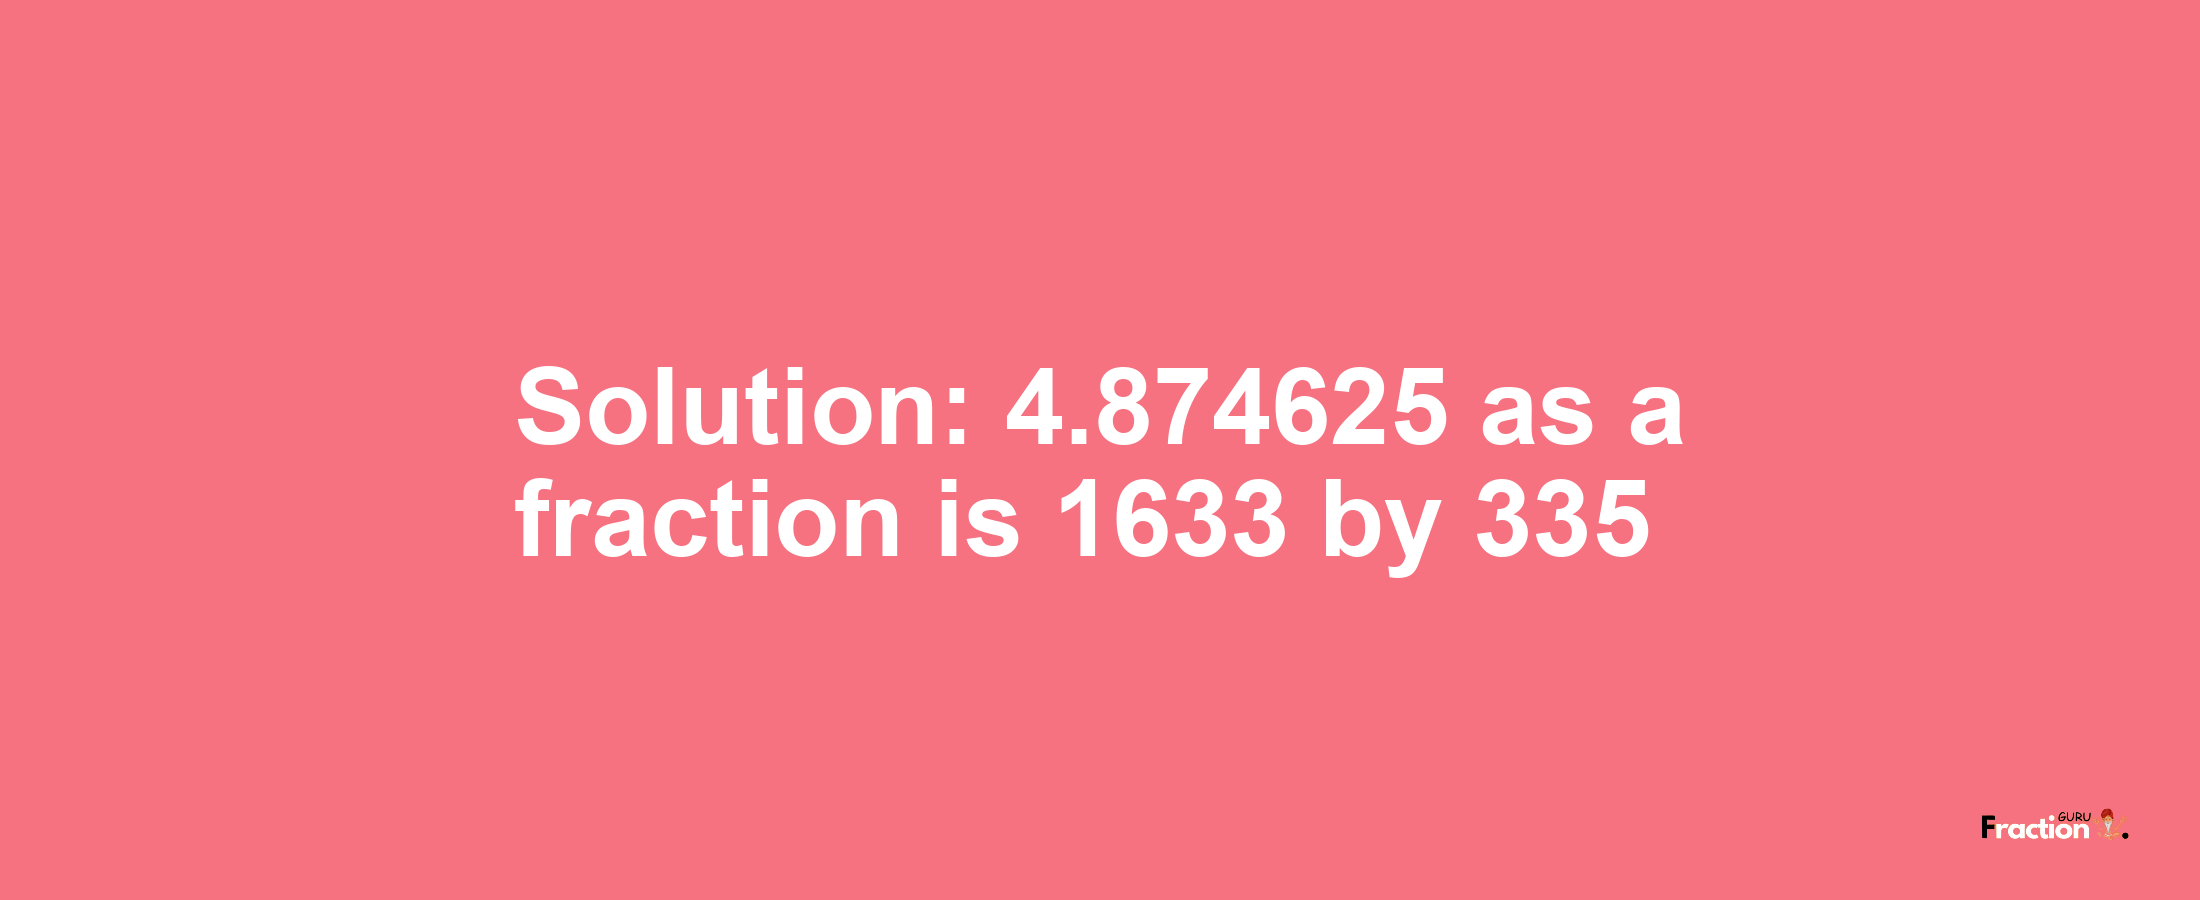 Solution:4.874625 as a fraction is 1633/335